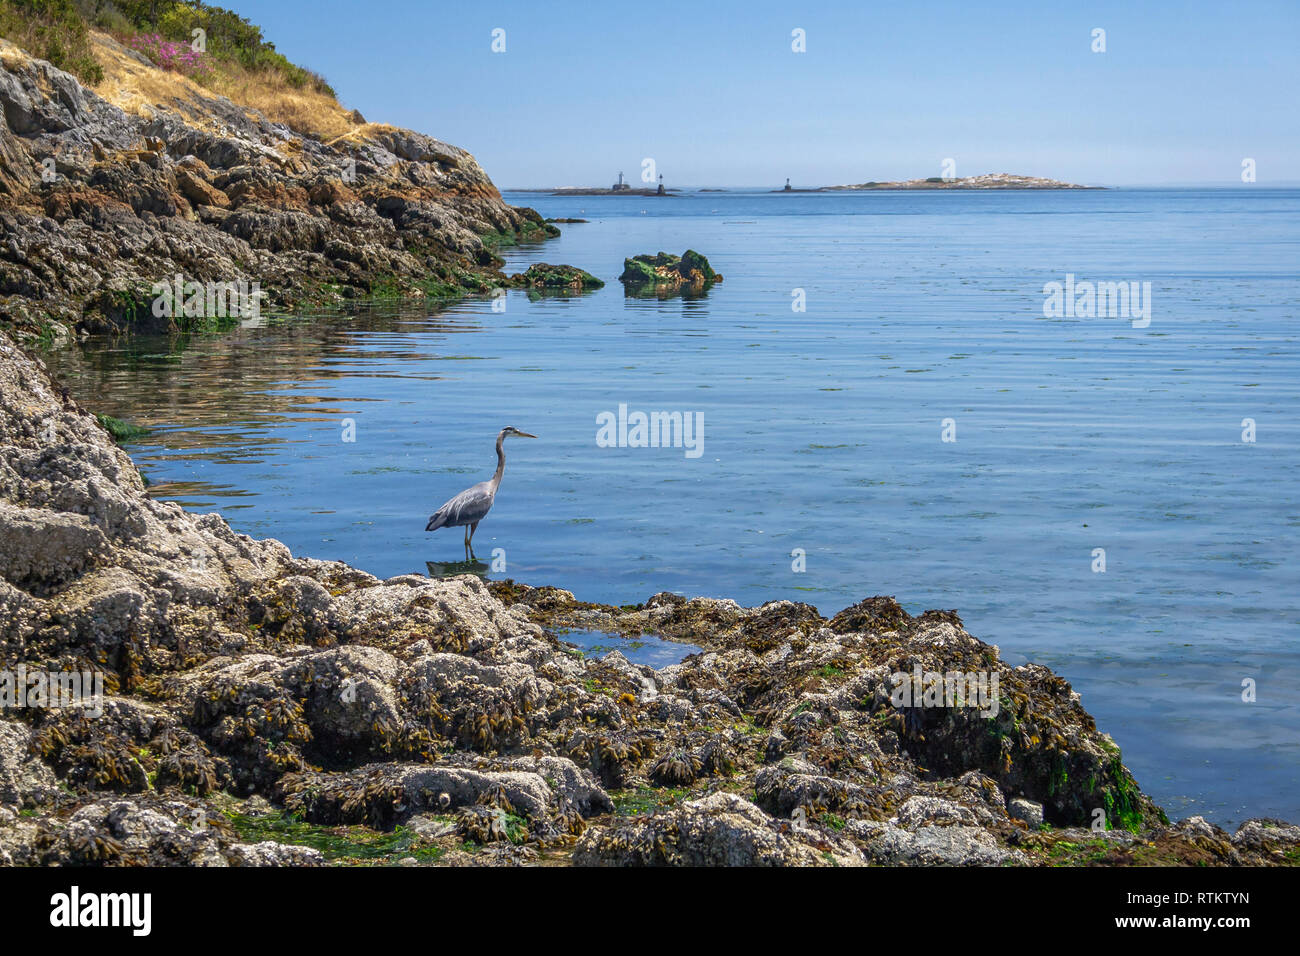 A Great Blue heron stands at the water's edge on a rocky shore at low tide, with islets and reefs, marked by beacons, in the distance  (summer day). Stock Photo